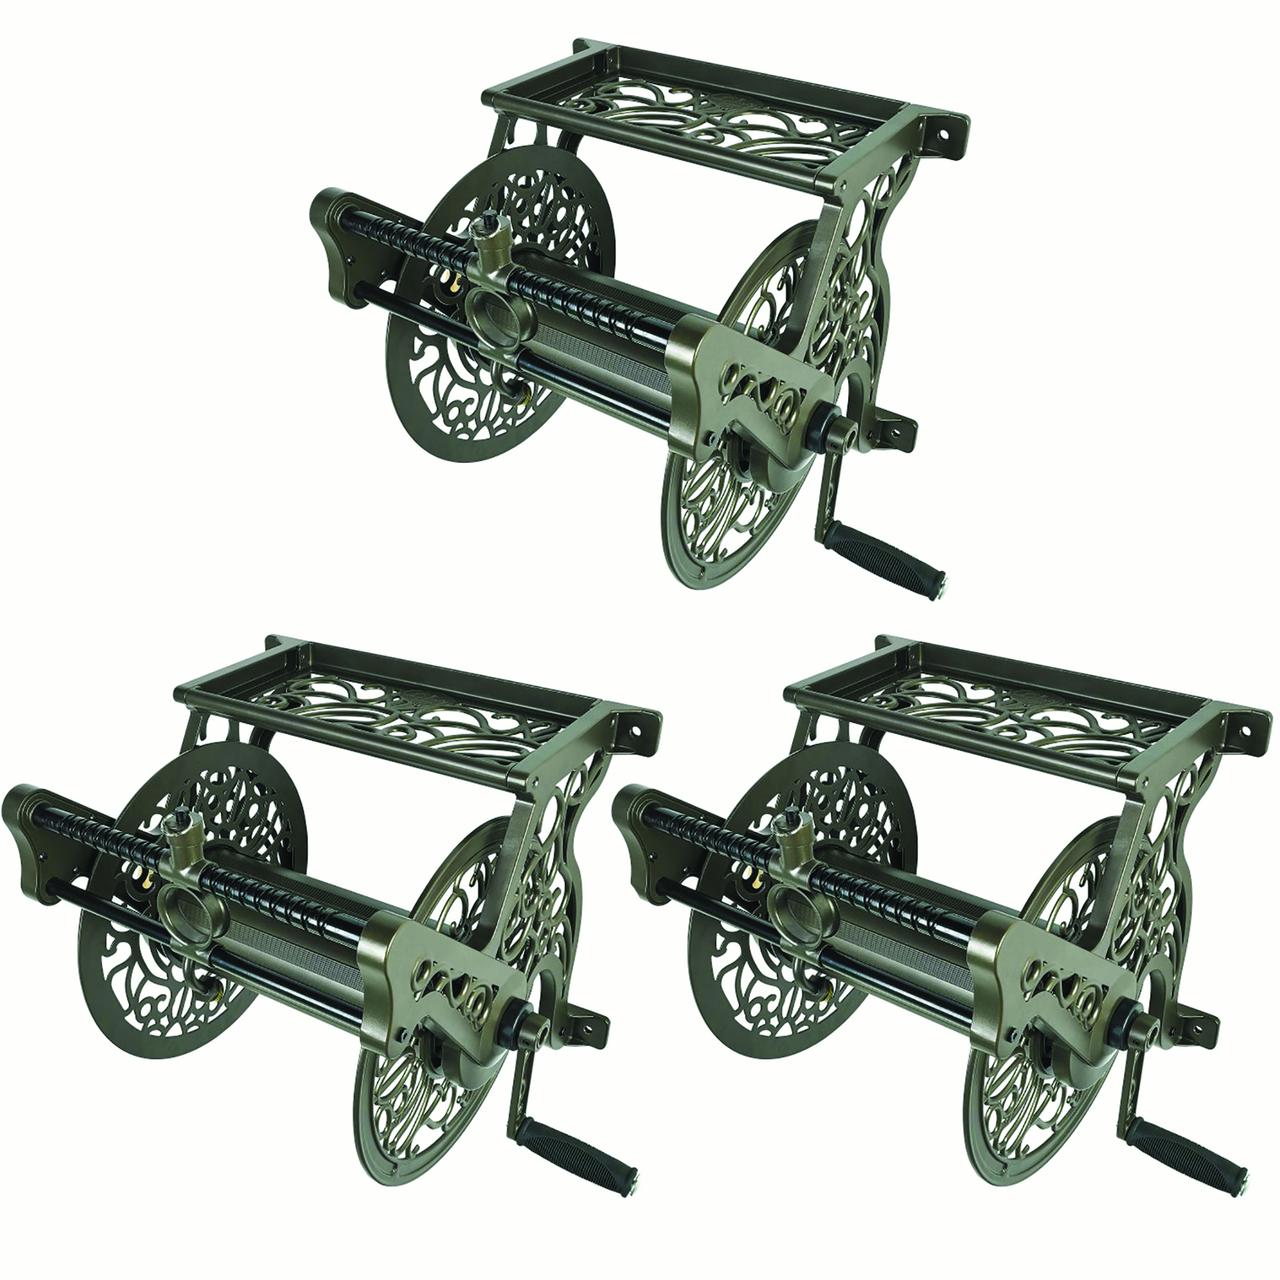 Liberty Garden Wall Mounted Heavy Aluminum Hanging Hose Reel w/ Guide (3 Pack)